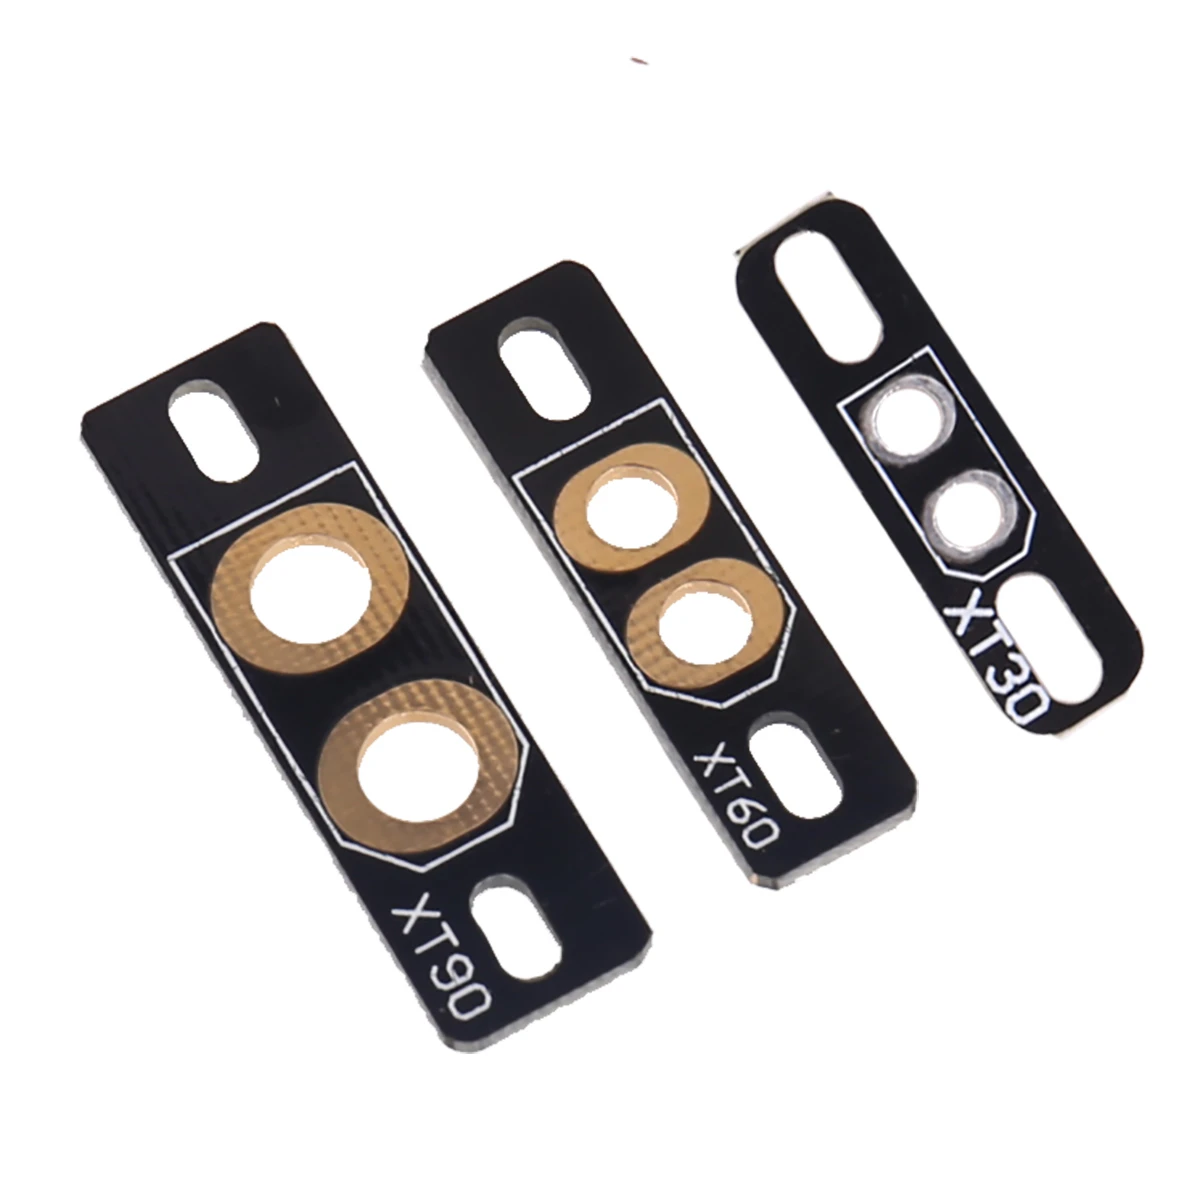 10 Pcs Connector PCB Welding Board Plate Fixed Seat For XT90 FPV Multicopter